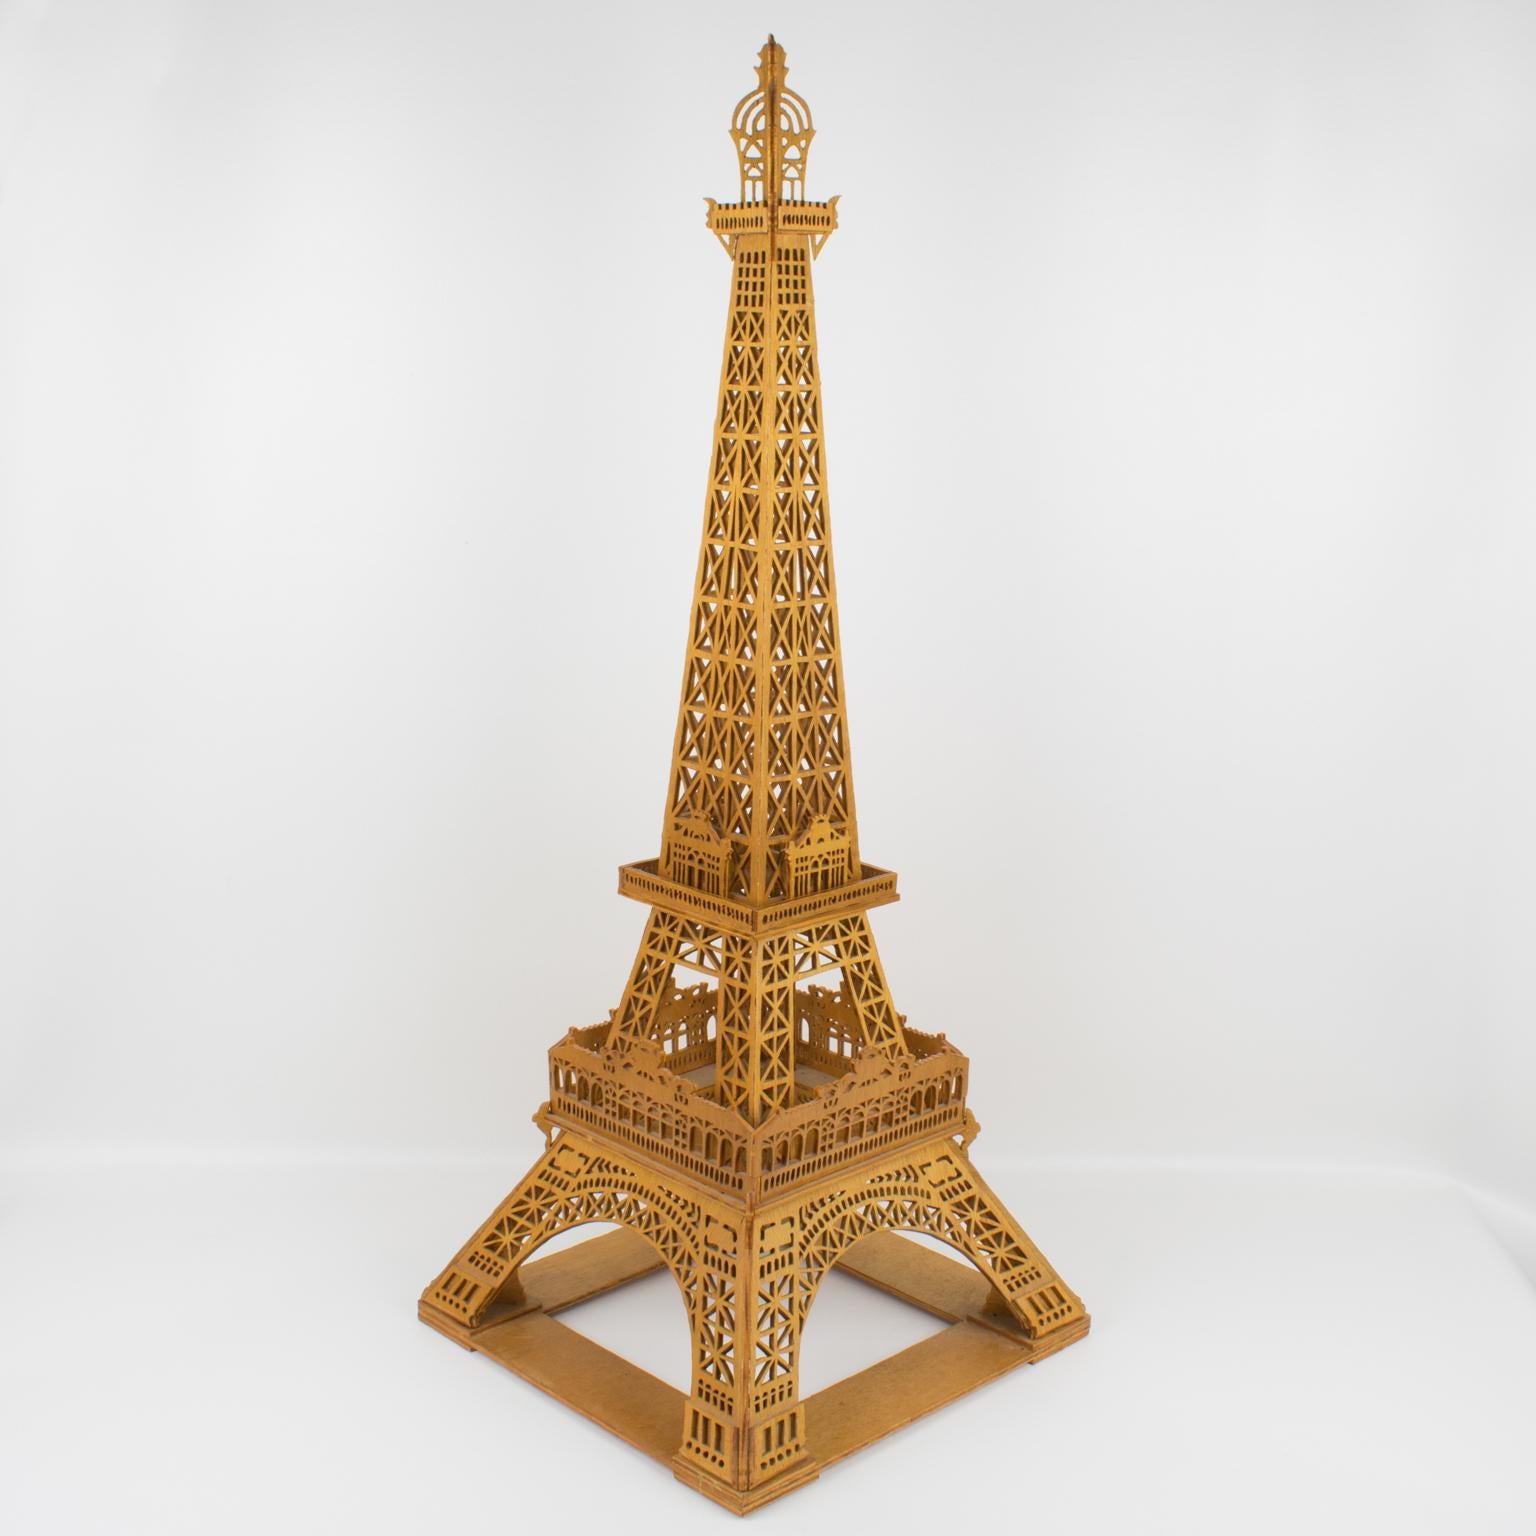 20th Century French Hand-Carved Wooden Eiffel Tower Model Miniature Sculpture